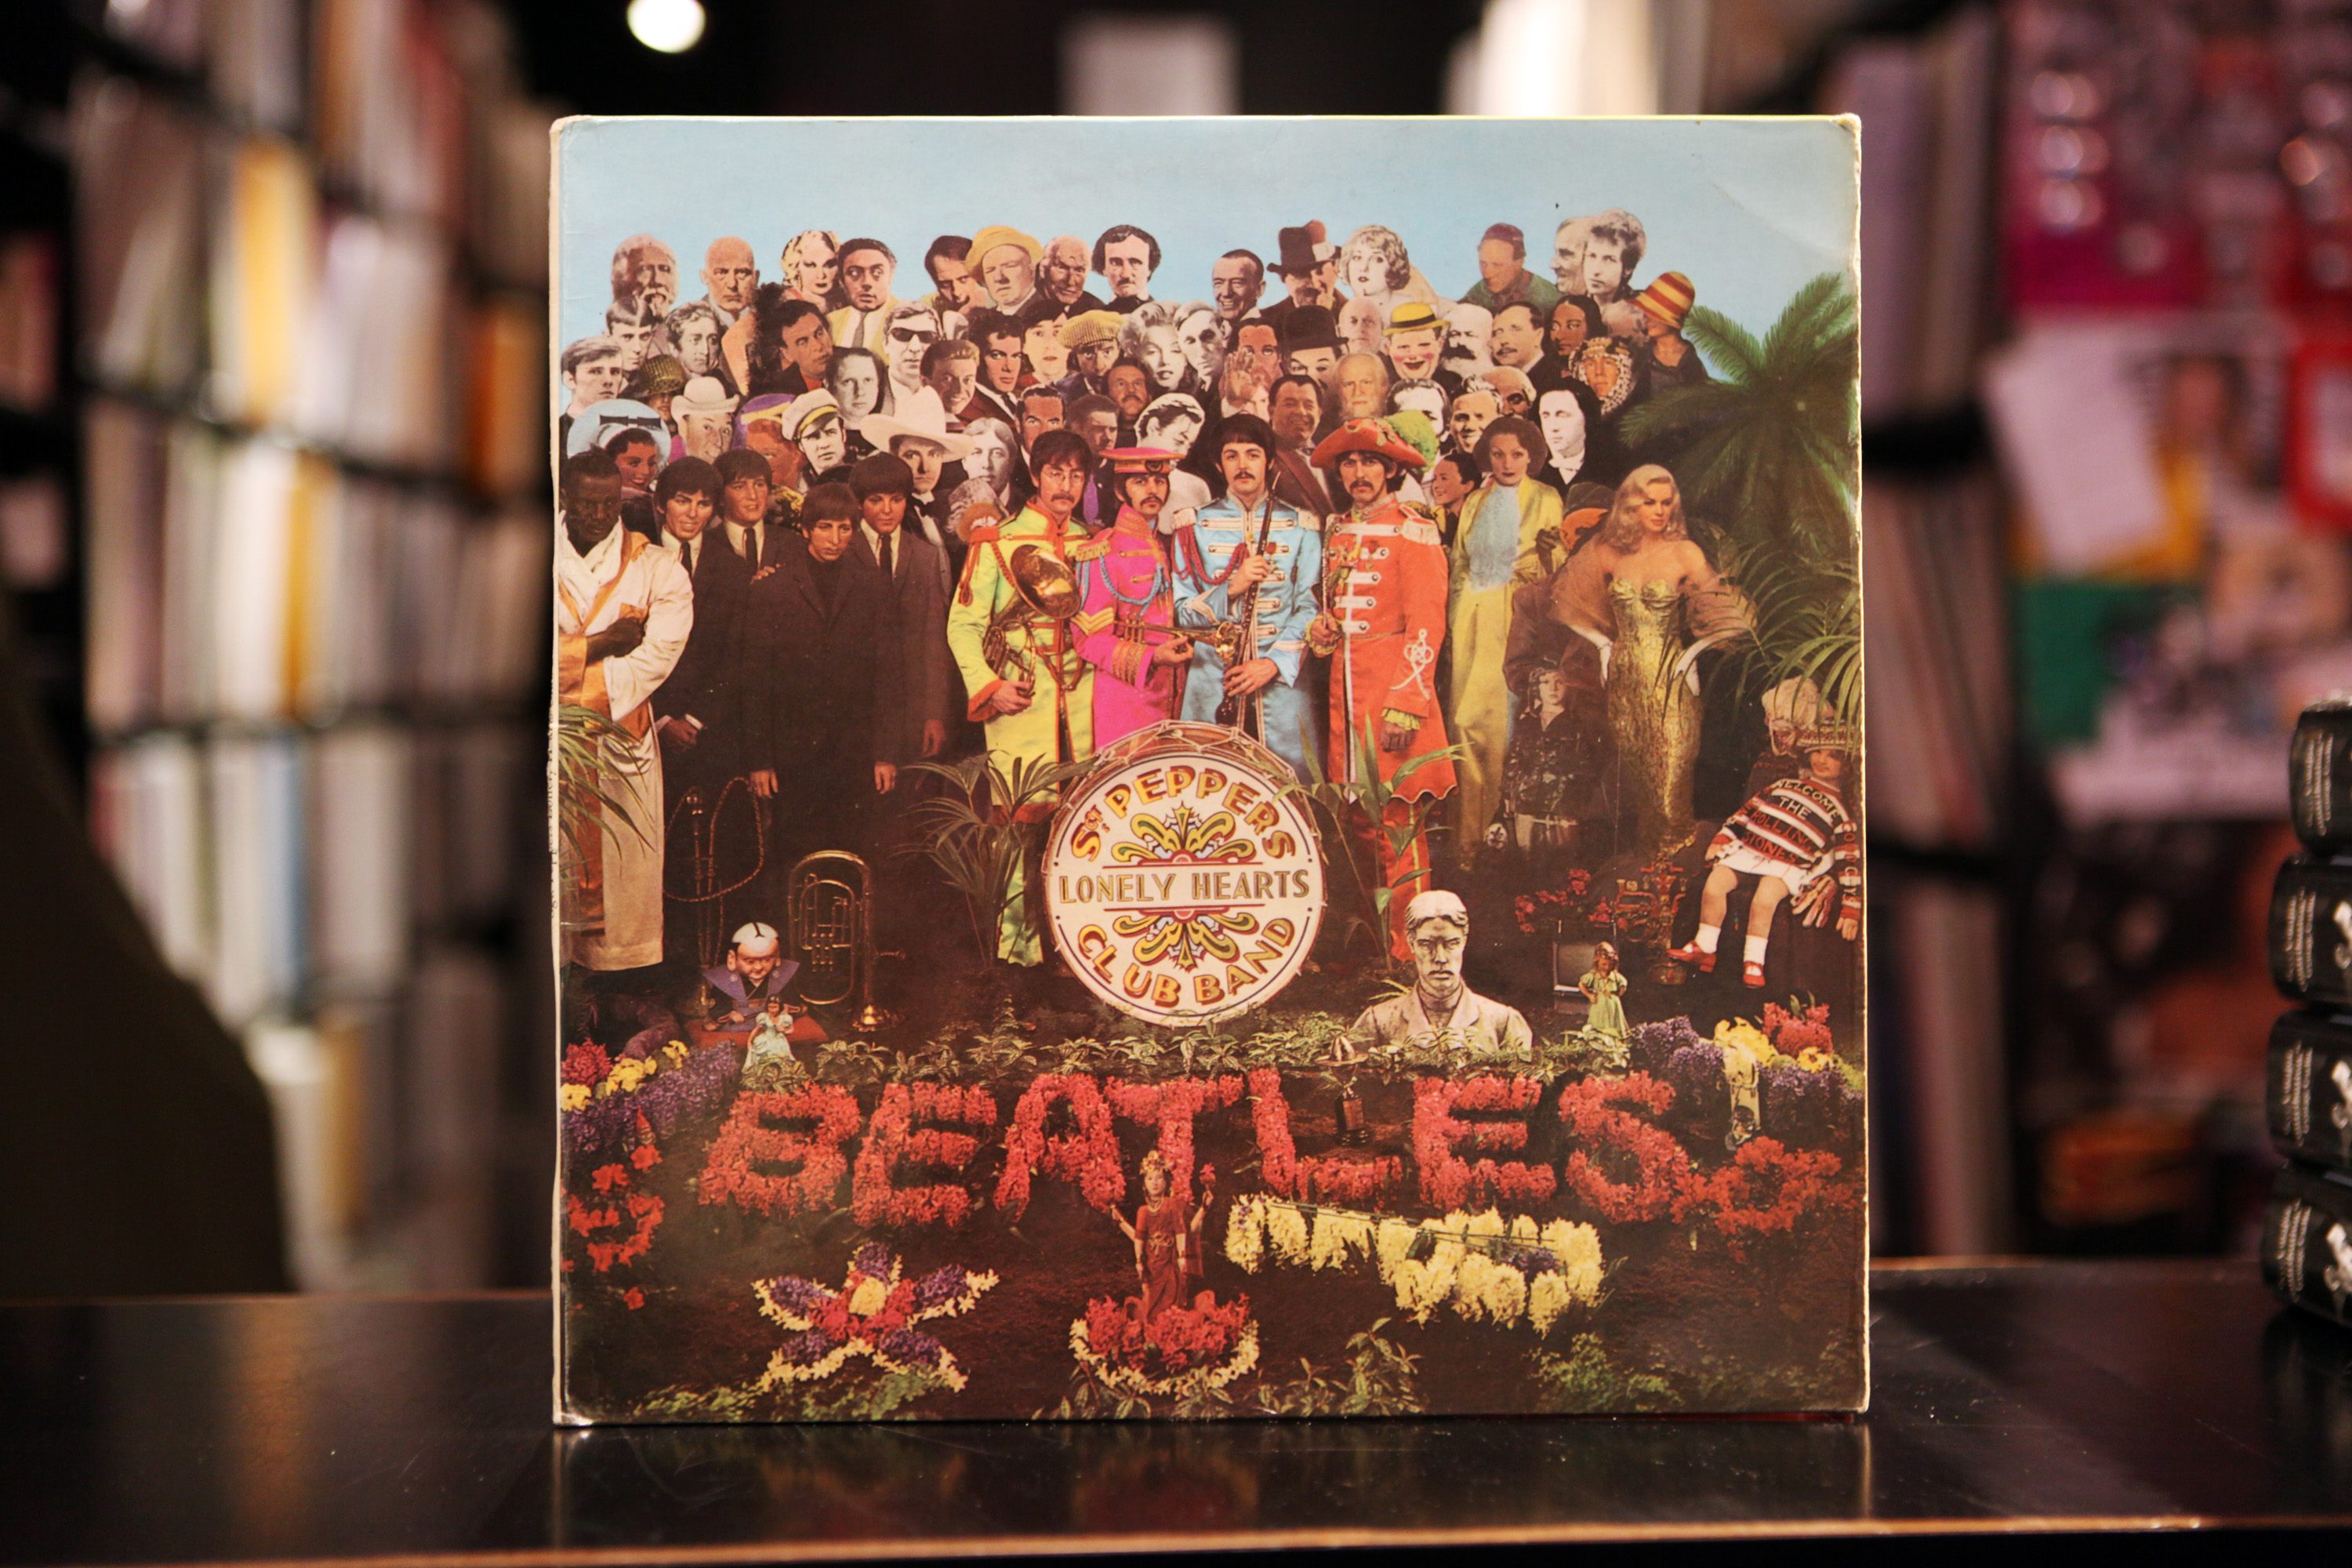 A vinyl copy of The Beatles' 'Sgt. Pepper's Lonely Hearts Club Band' 